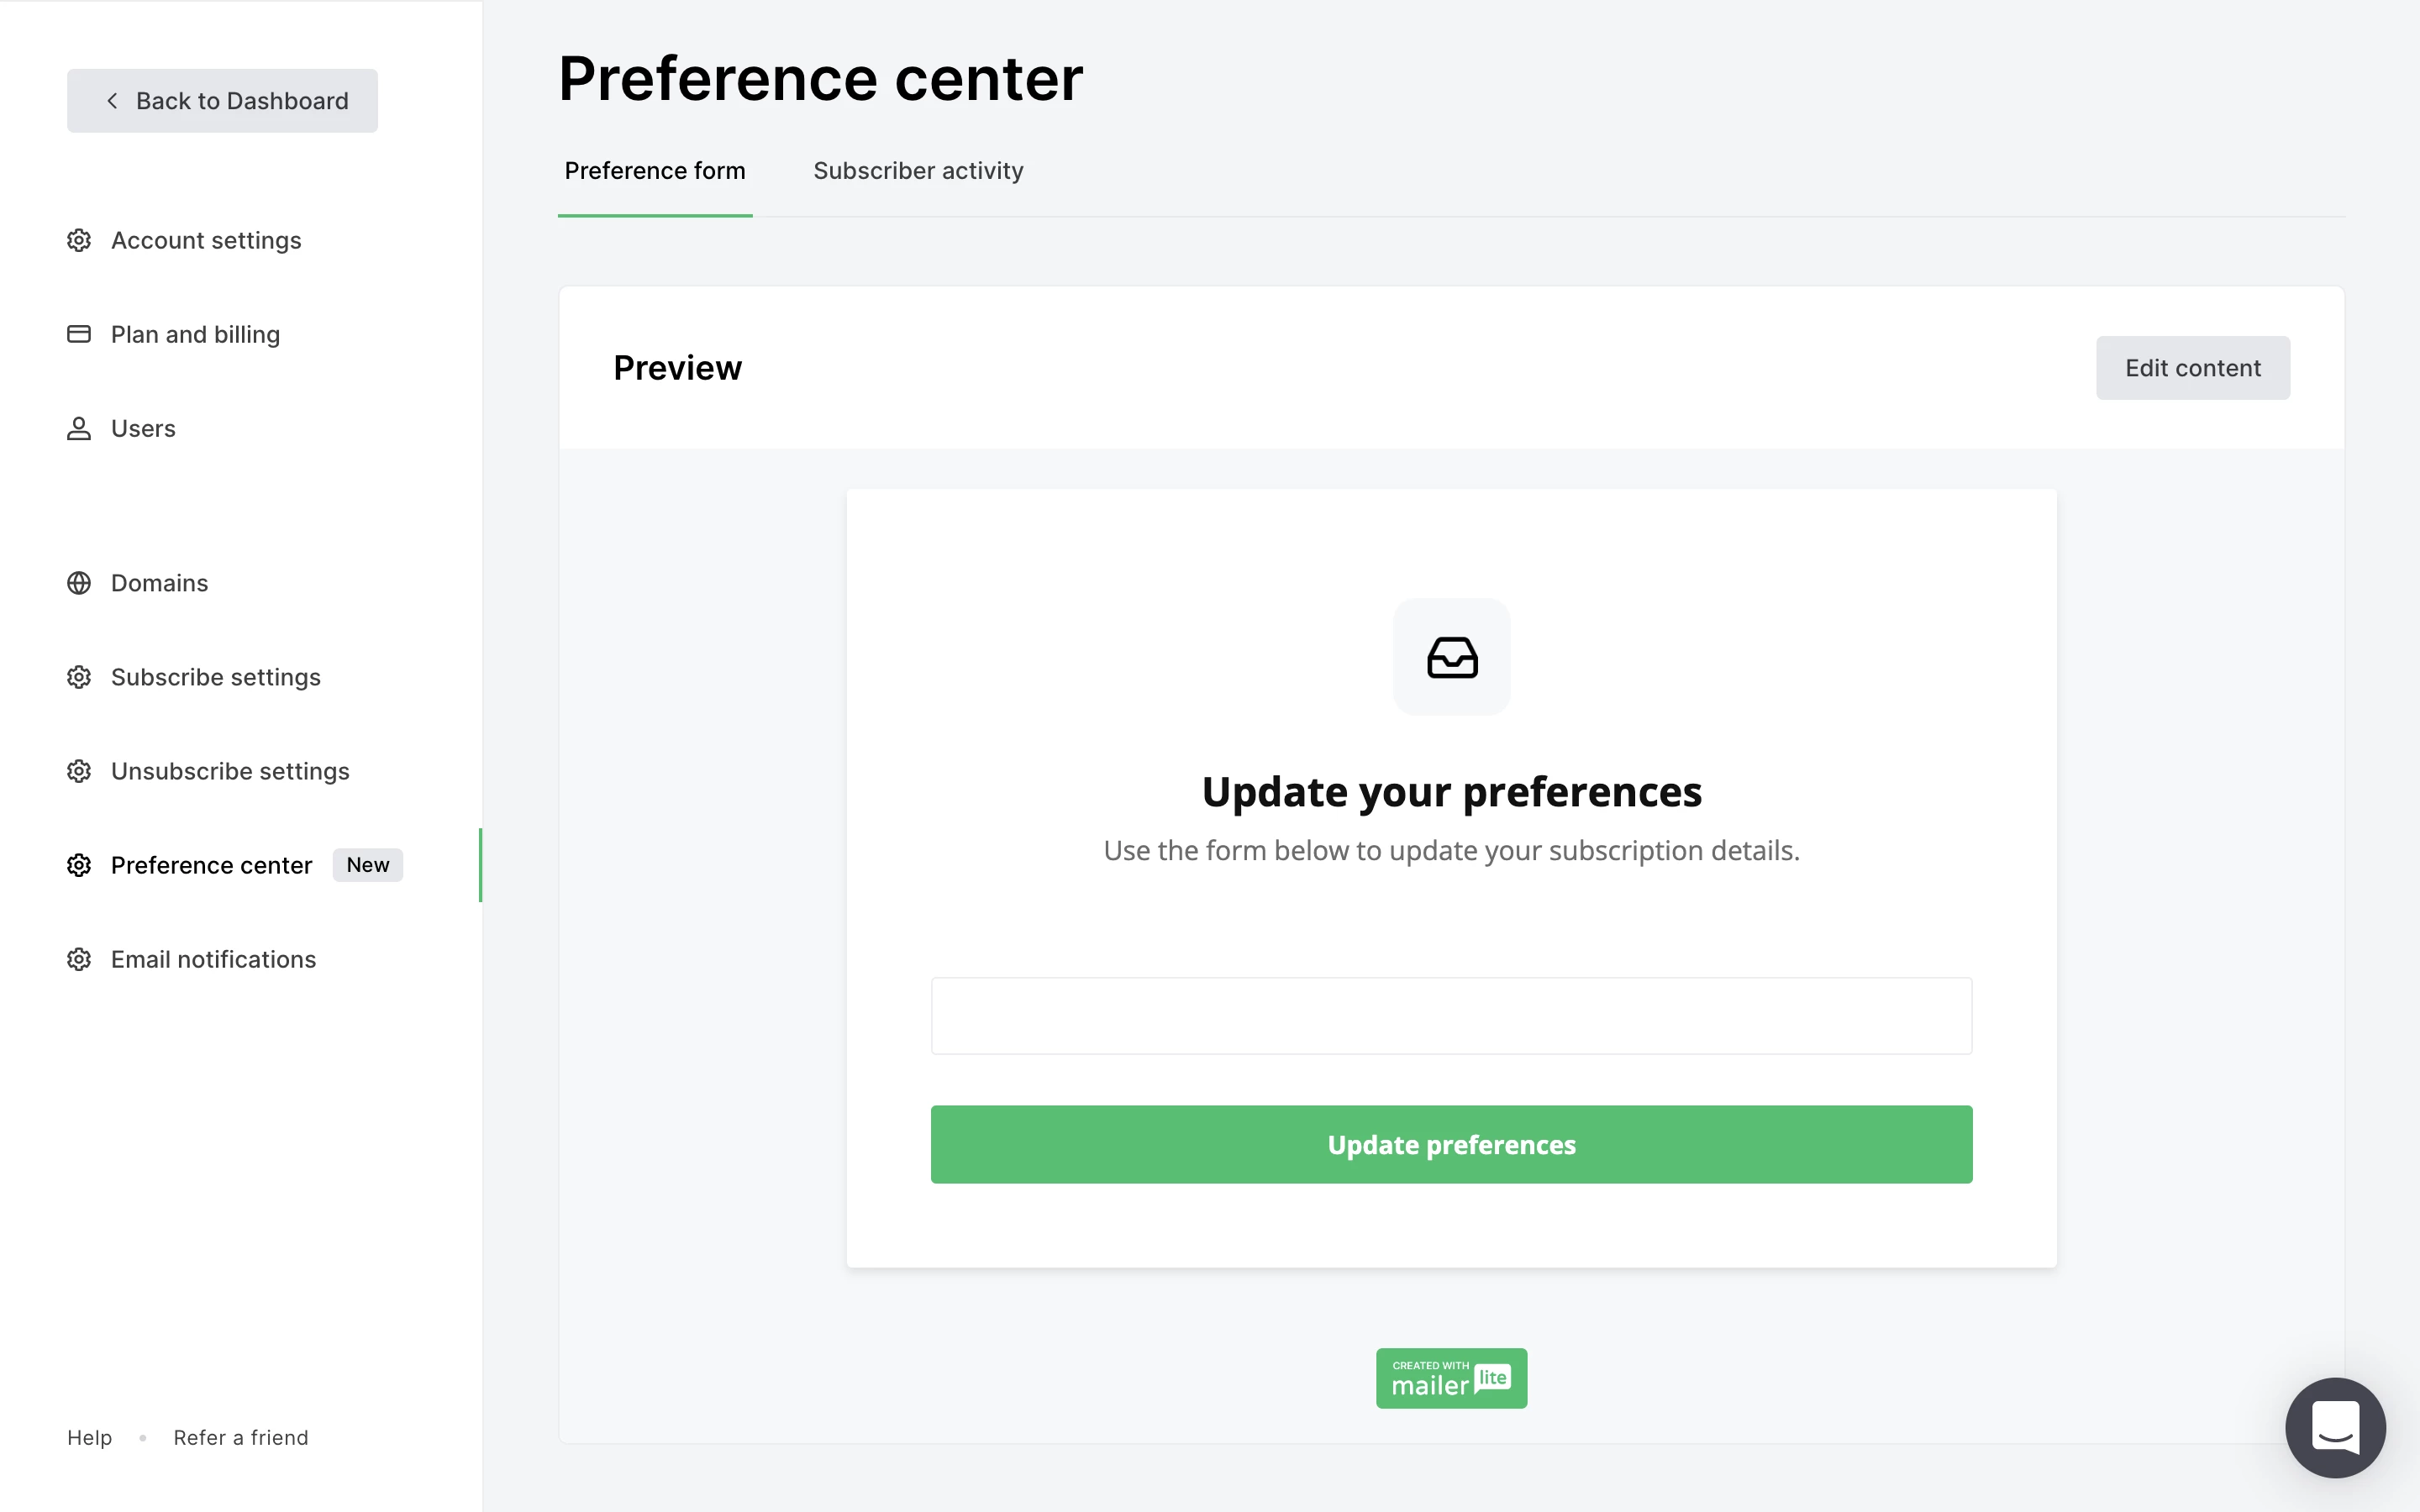 MailerLite's email preference center editor